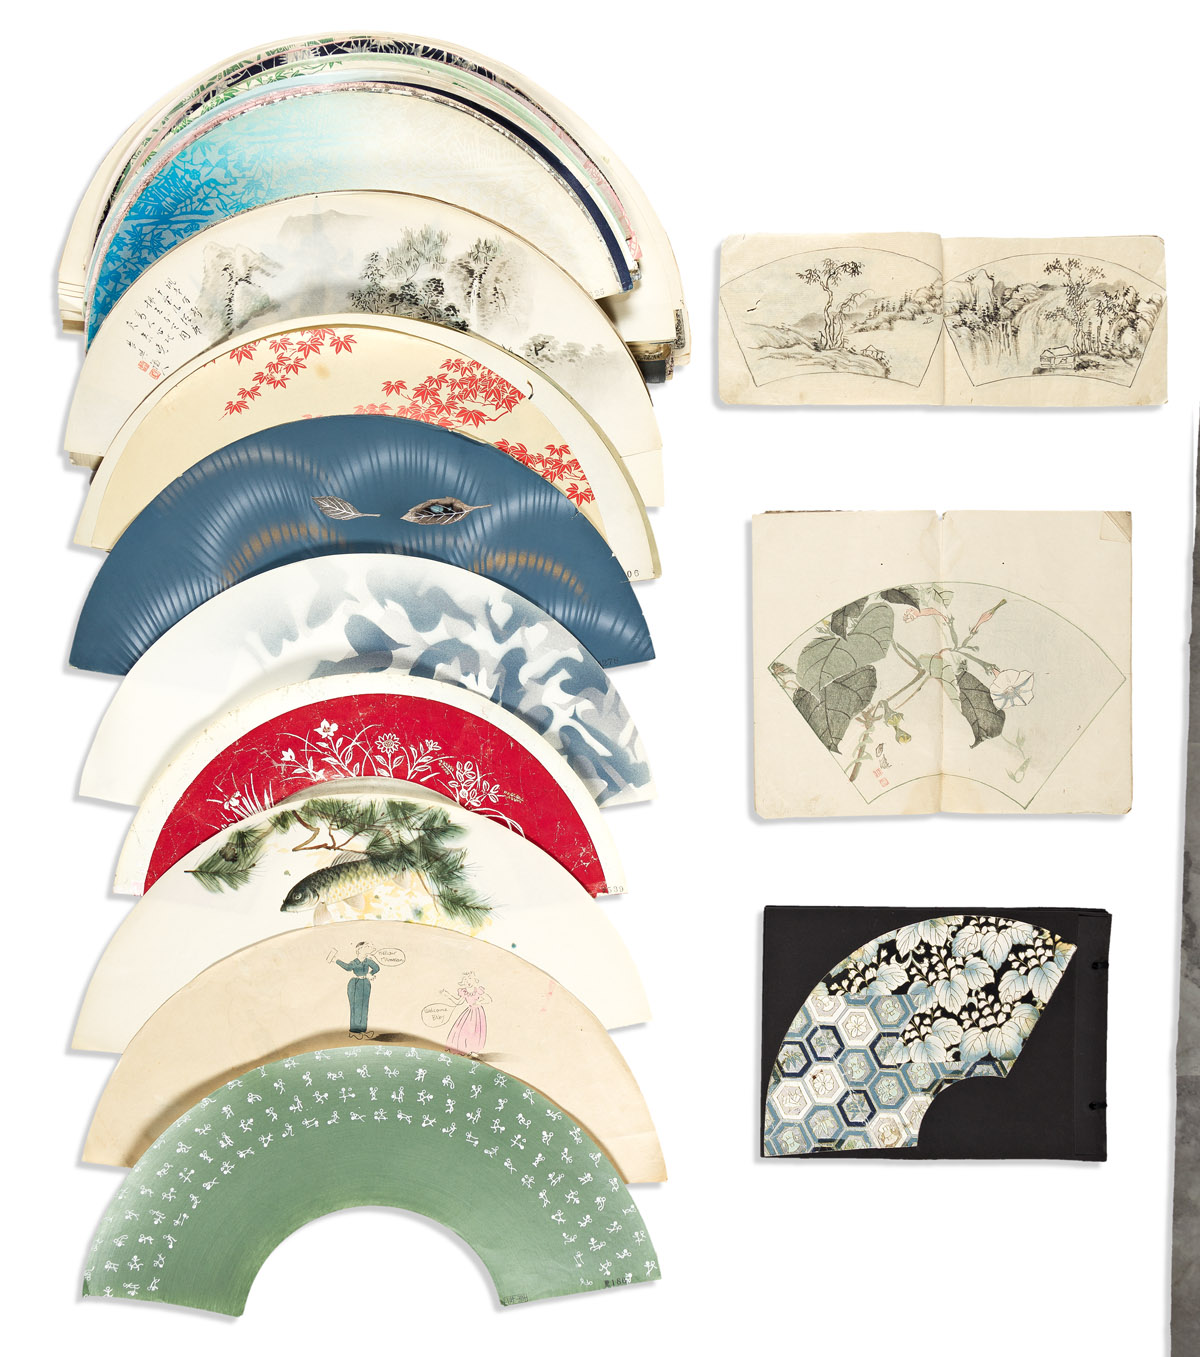 (JAPAN -- FAN DESIGN.) Large archive of Japanese fan designs and patterns, early 19th century through the 1950s.